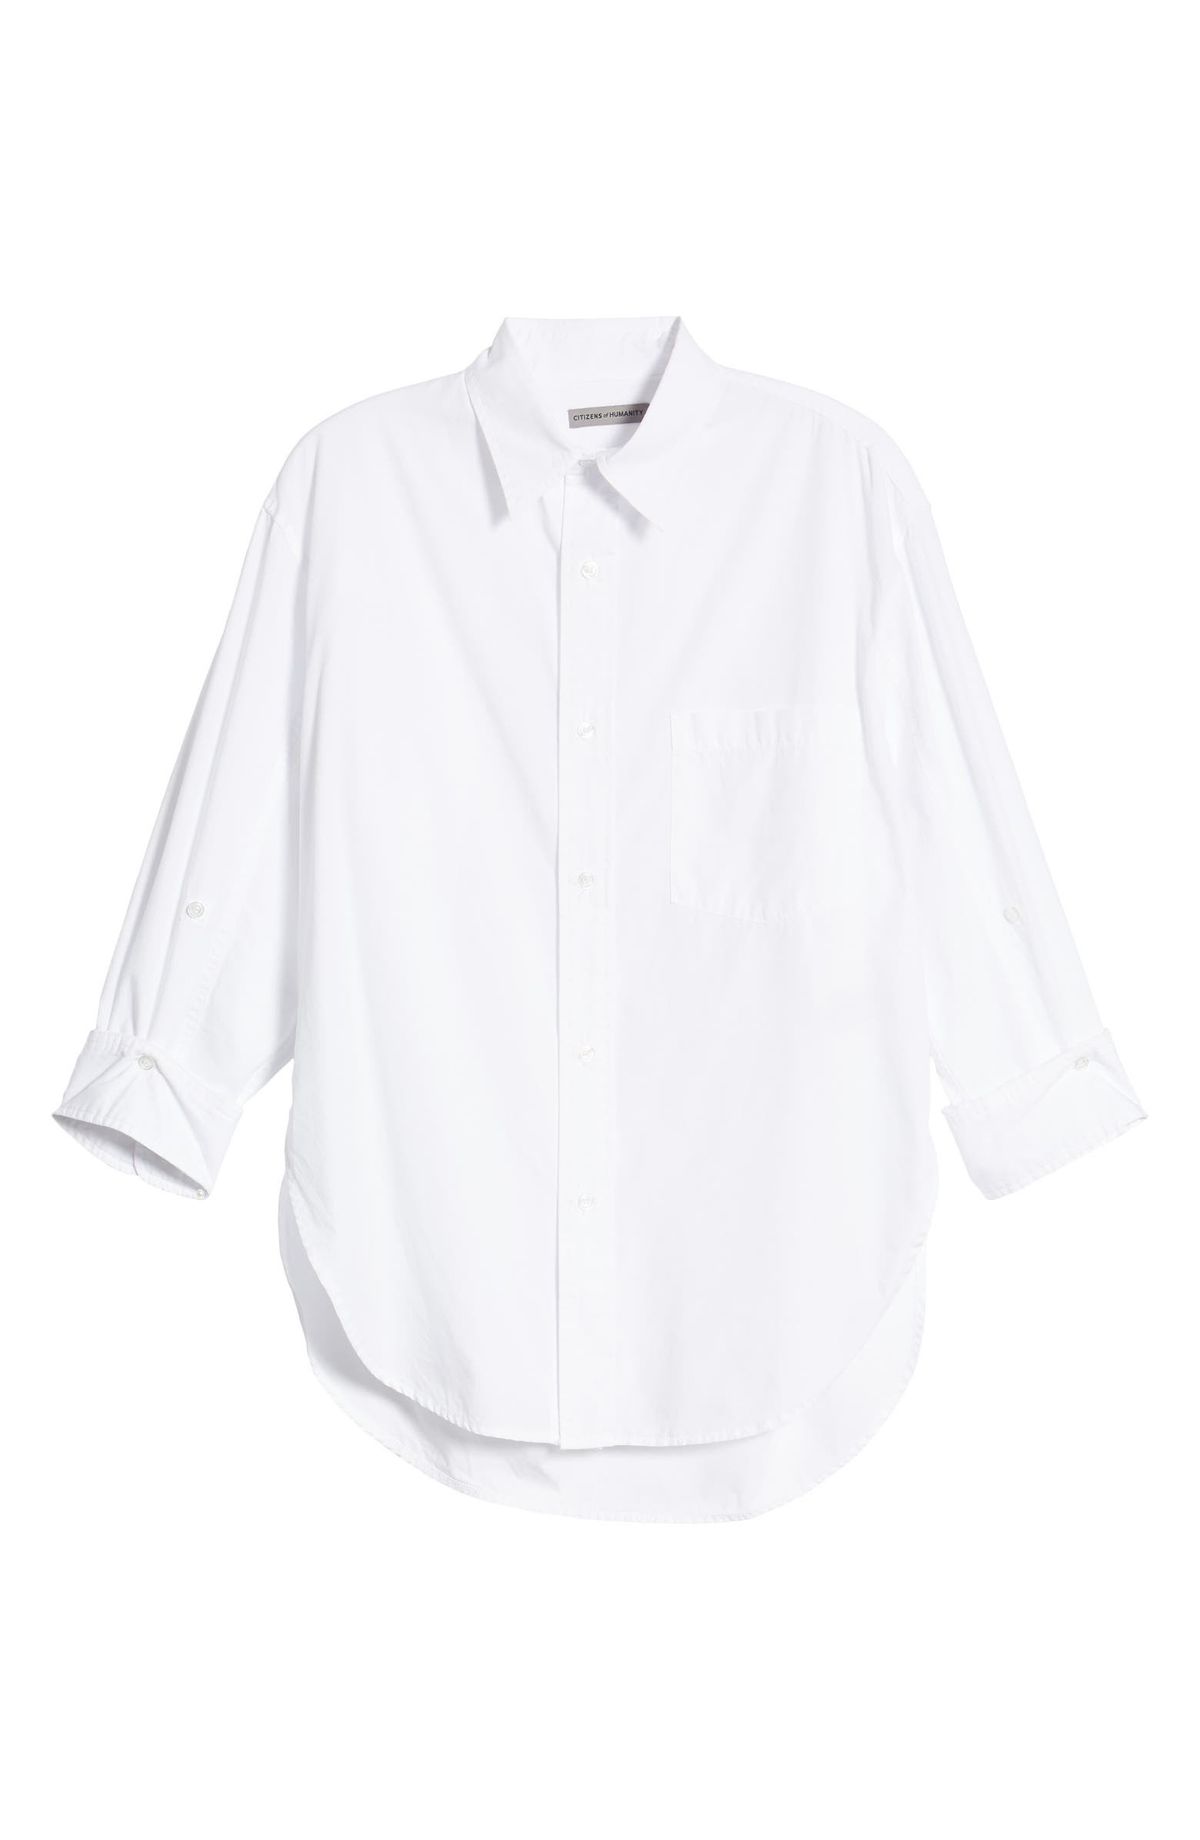 citizens of humanity white cotton button up